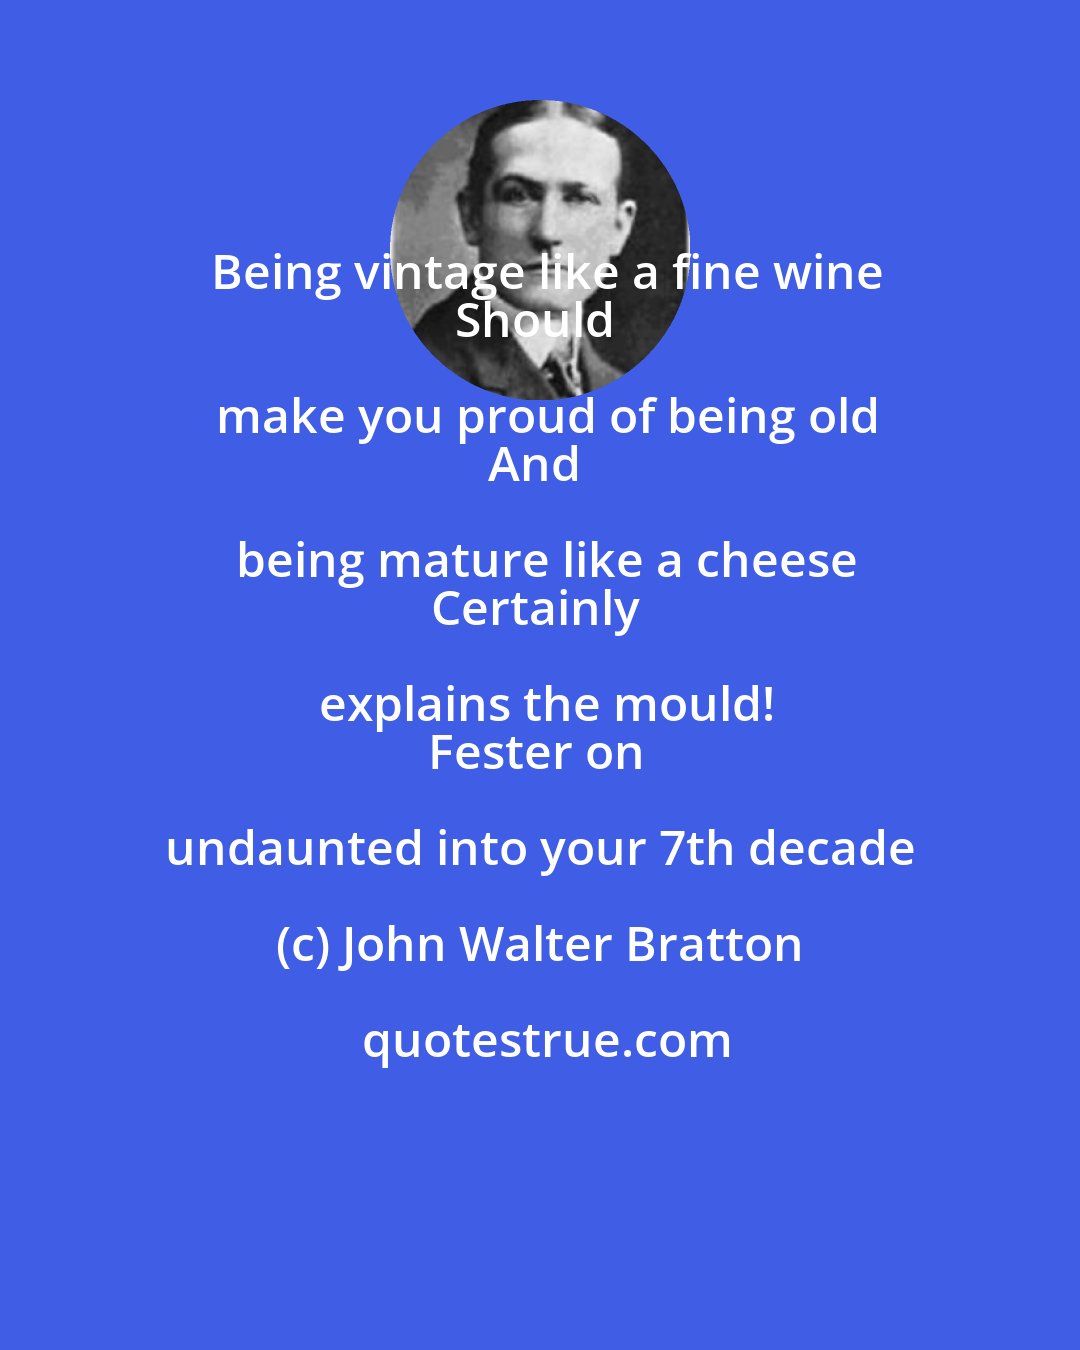 John Walter Bratton: Being vintage like a fine wine
Should make you proud of being old
And being mature like a cheese
Certainly explains the mould!
Fester on undaunted into your 7th decade